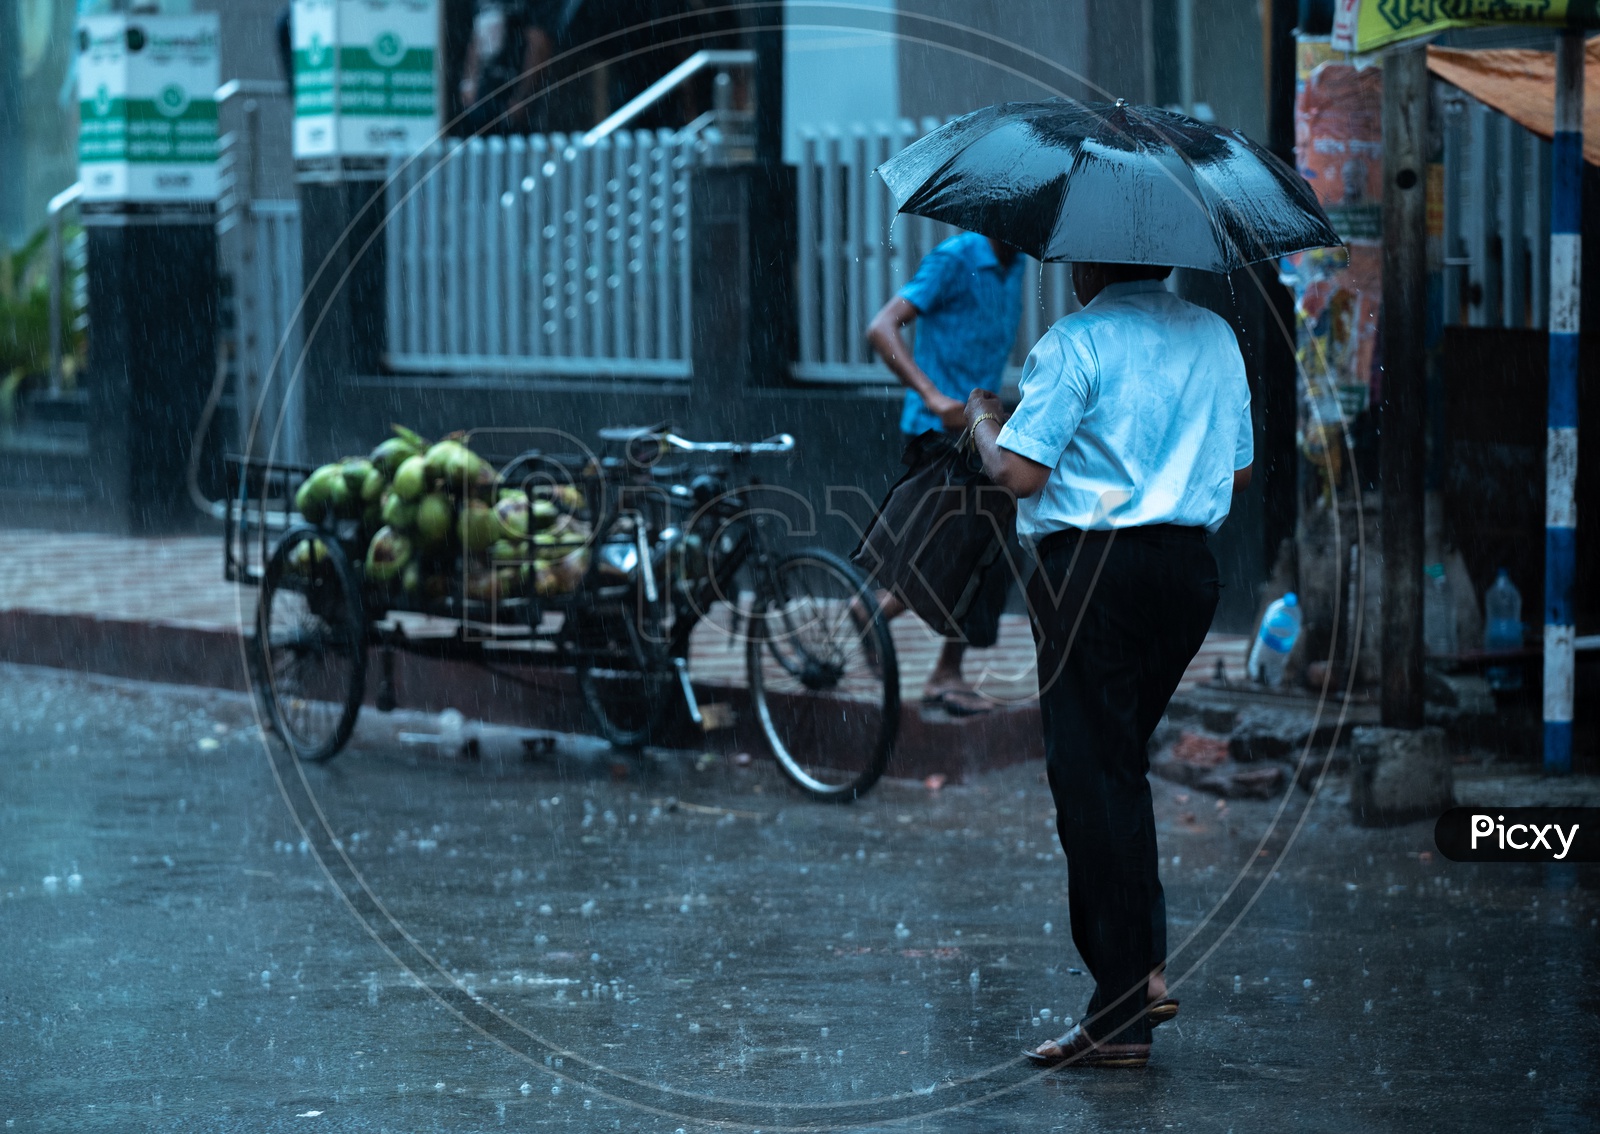 Pedestrians  Holding  umbrellas And Taking Cover from Heavy  Rain  Duer To Cyclone Fani  on  Howrah  Roads